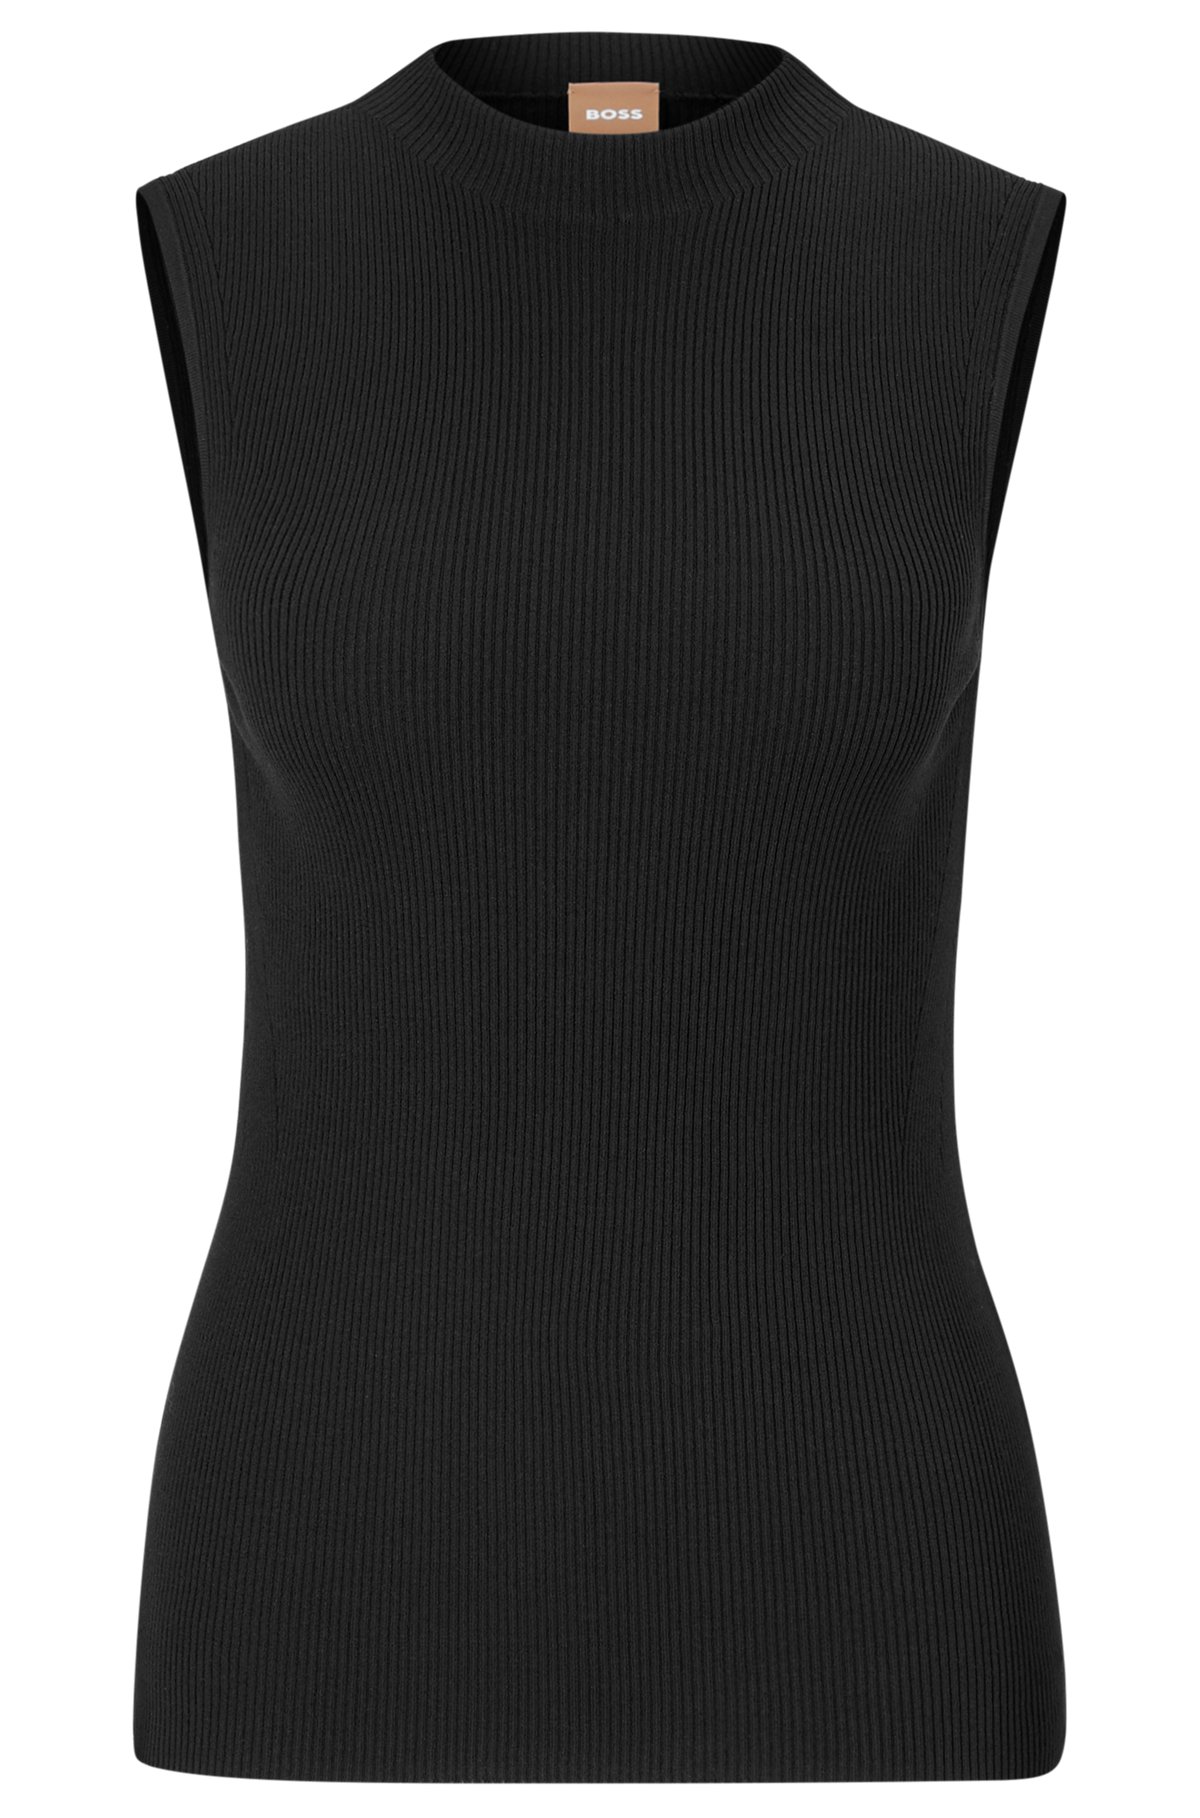 Sleeveless mock-neck top in ribbed fabric, Black